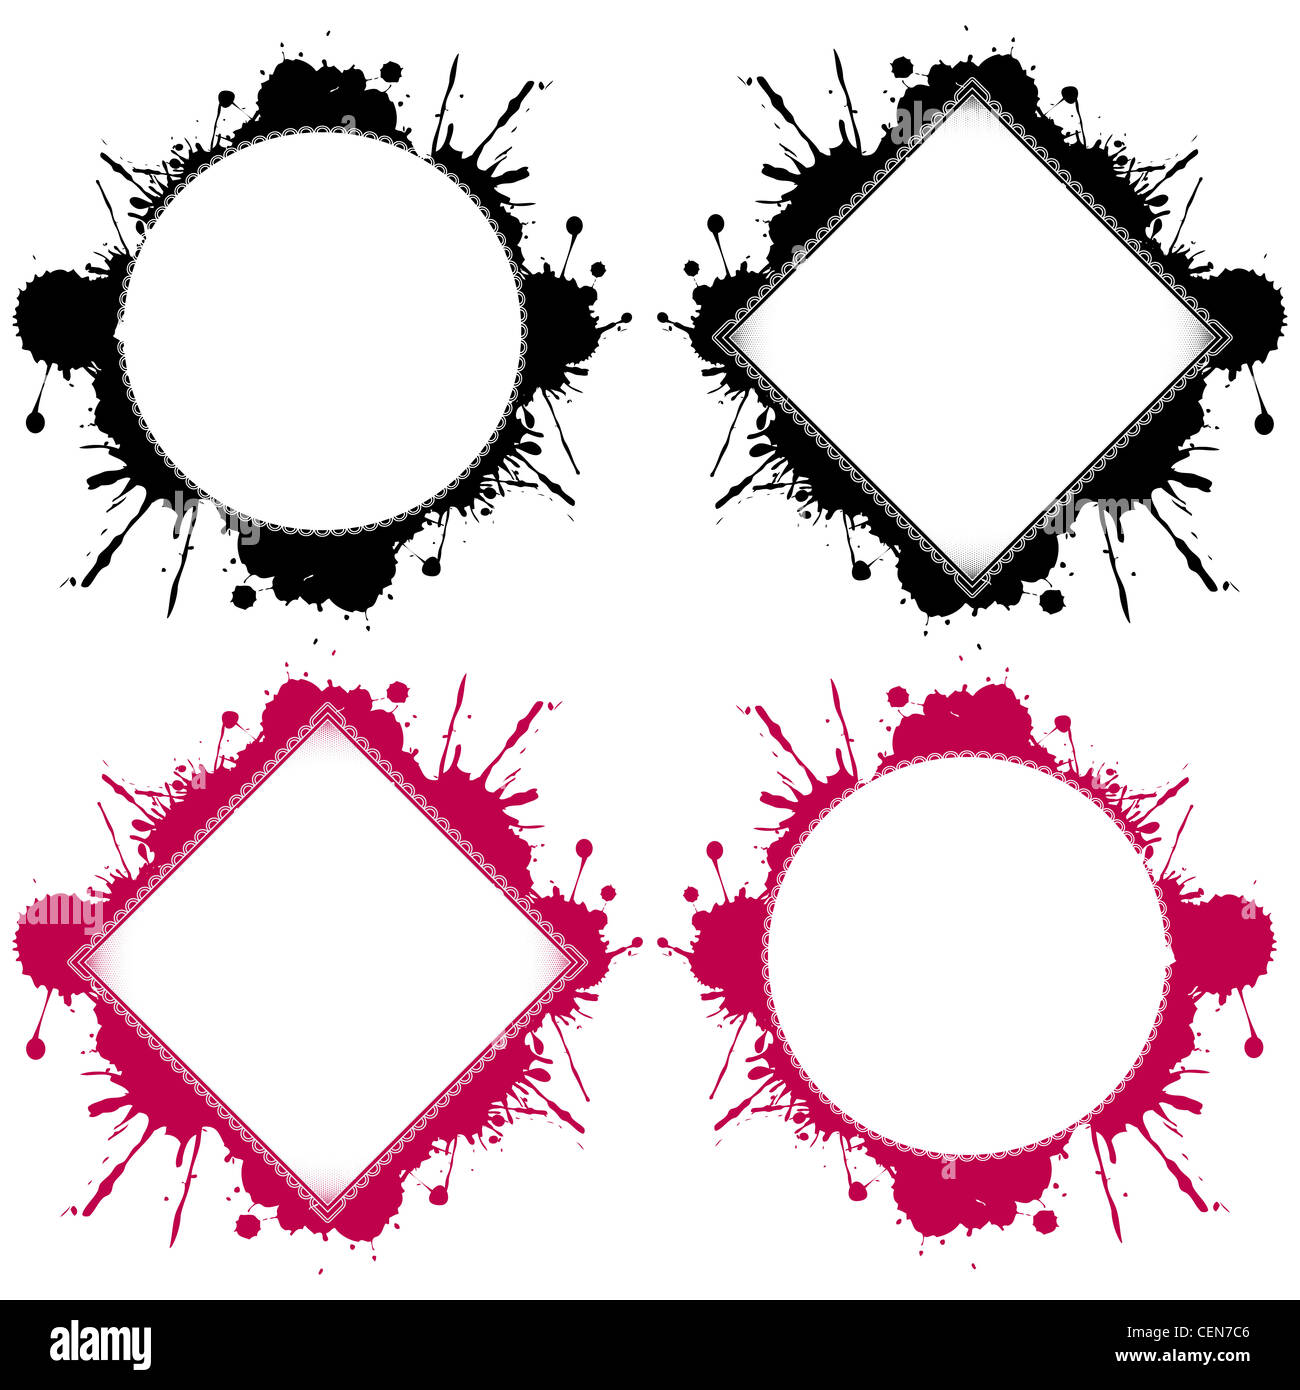 round and square templates ready for your design over white background, abstract vector art illustration Stock Photo